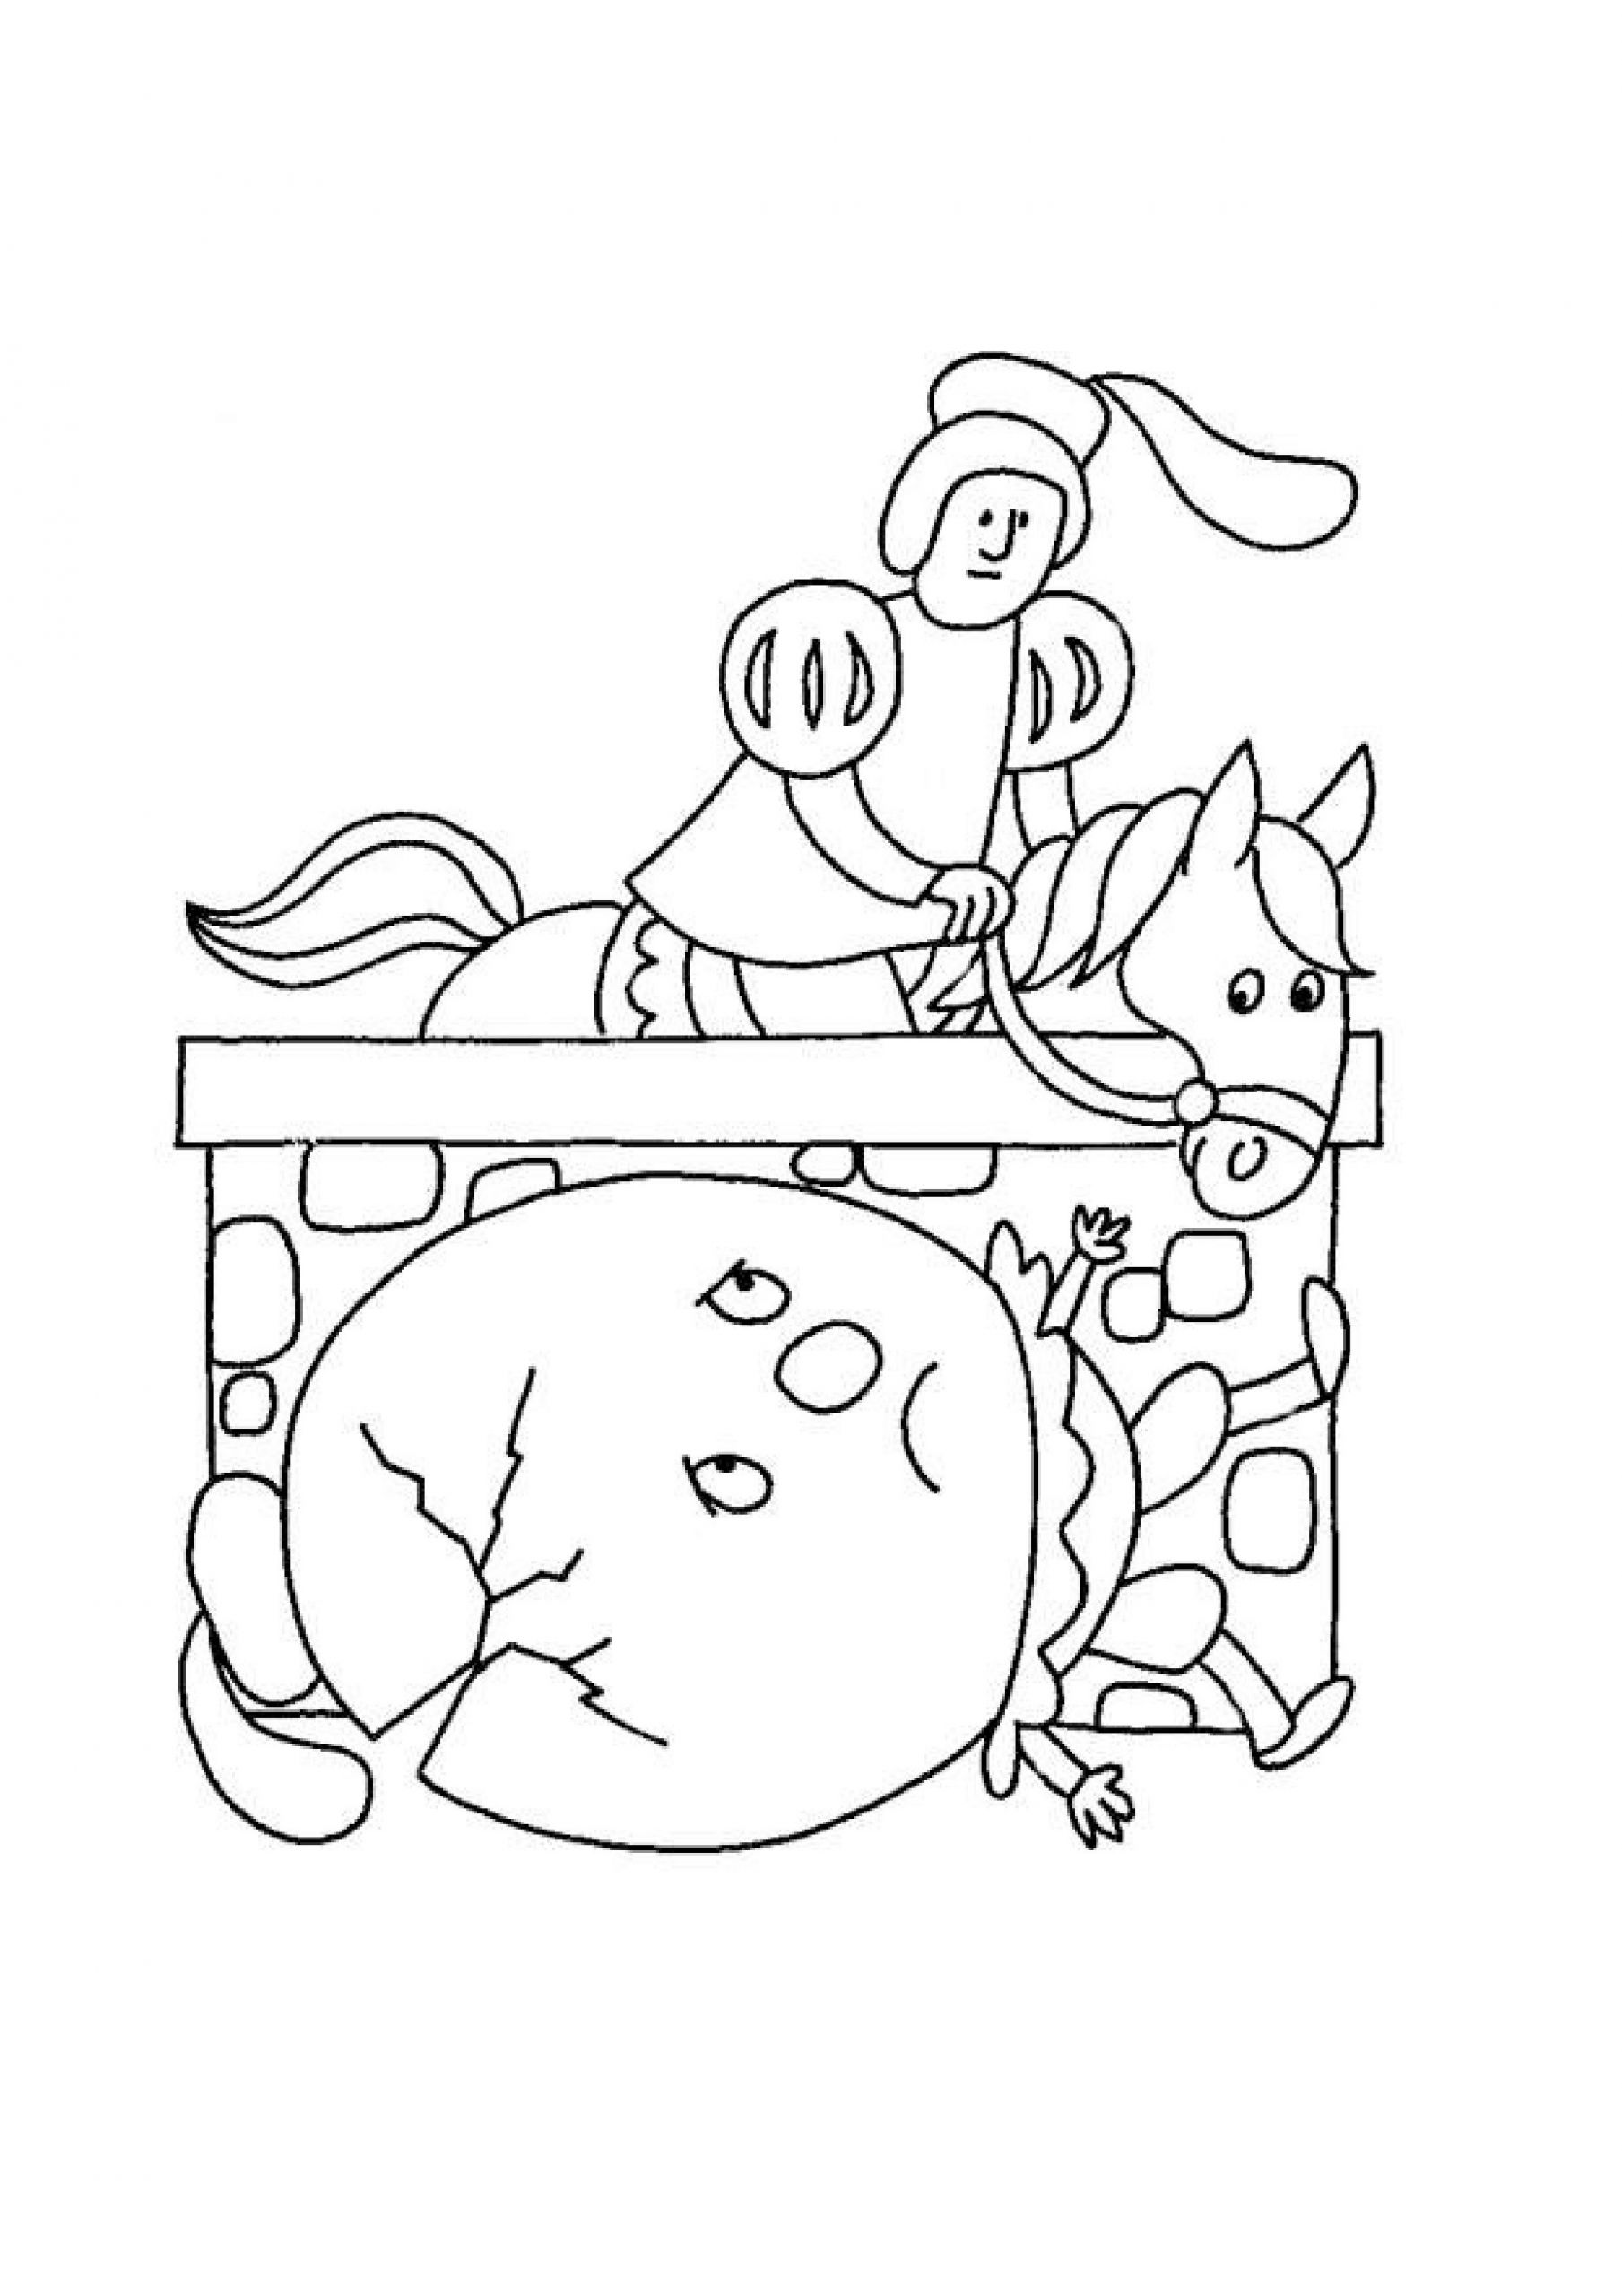 Download Coloring Pages For Kids
 Nursery Rhymes Coloring Pages Printable Free Download